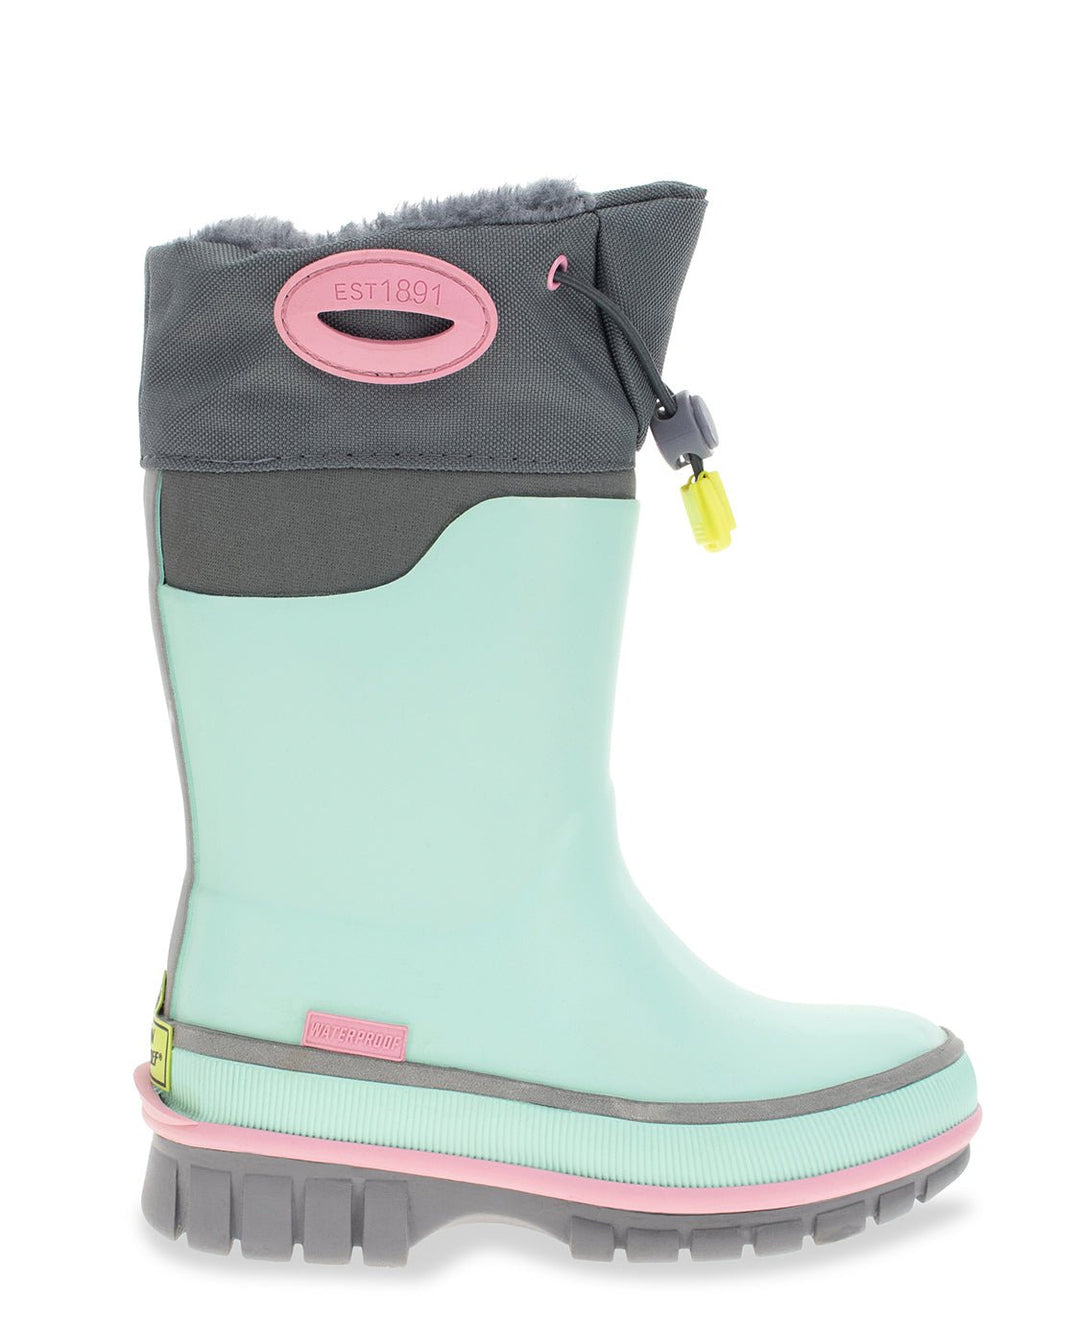 Kids Neoprene Cold Weather Boot - Frost - Western Chief